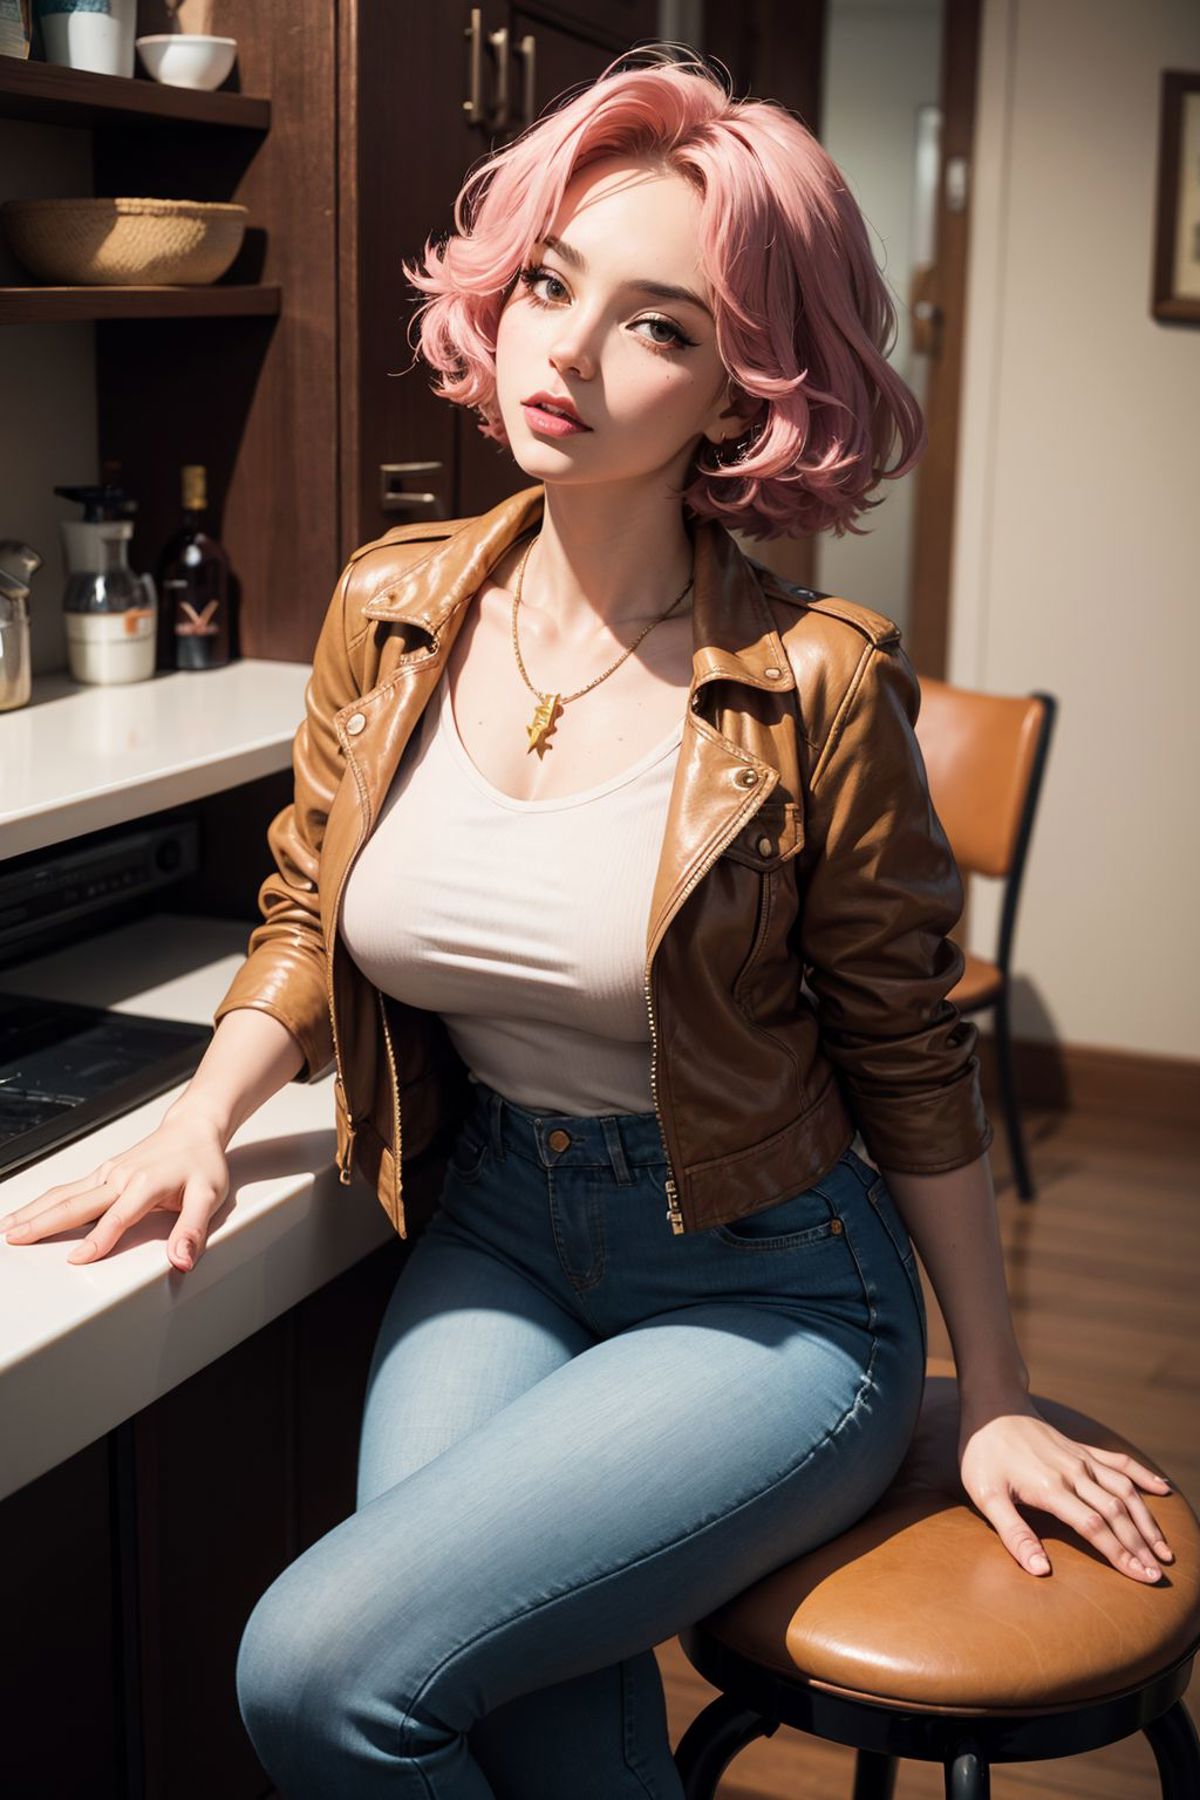 A woman wearing a leather jacket stands in a kitchen.